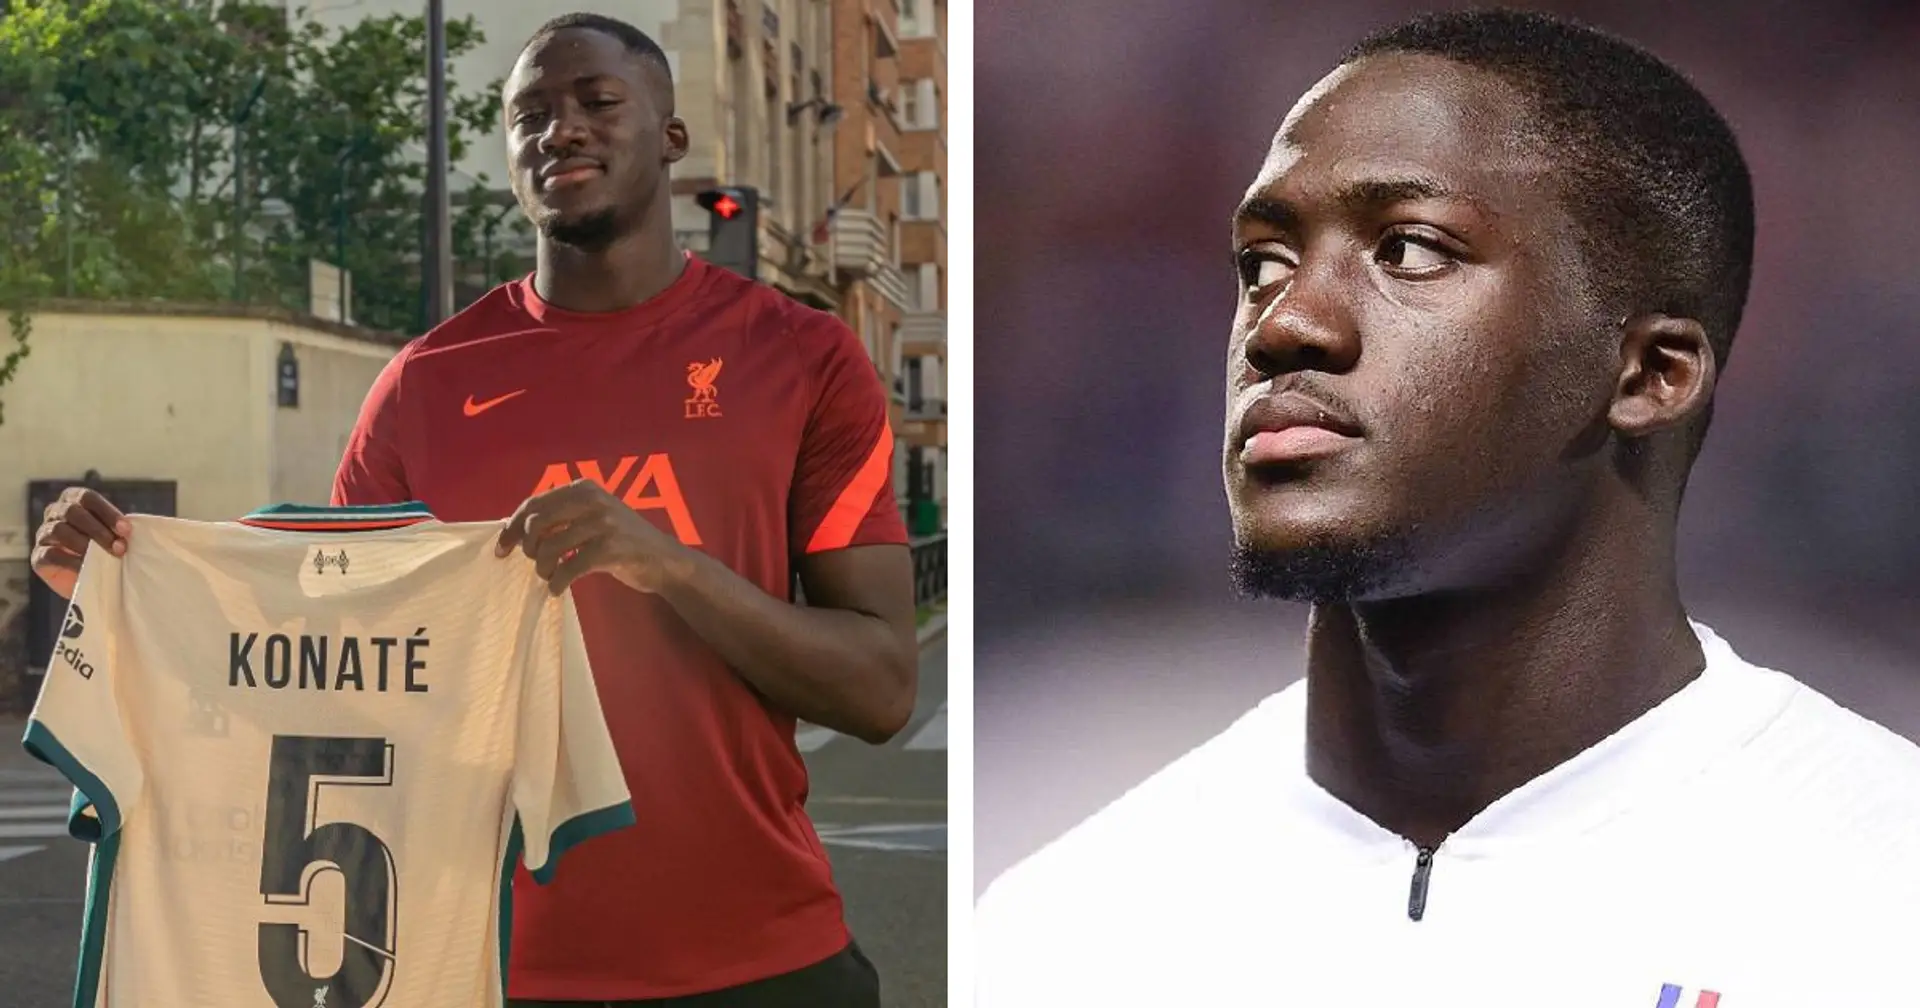 3 iconic photos as Liverpool confirm Konate's No. 5 jersey 